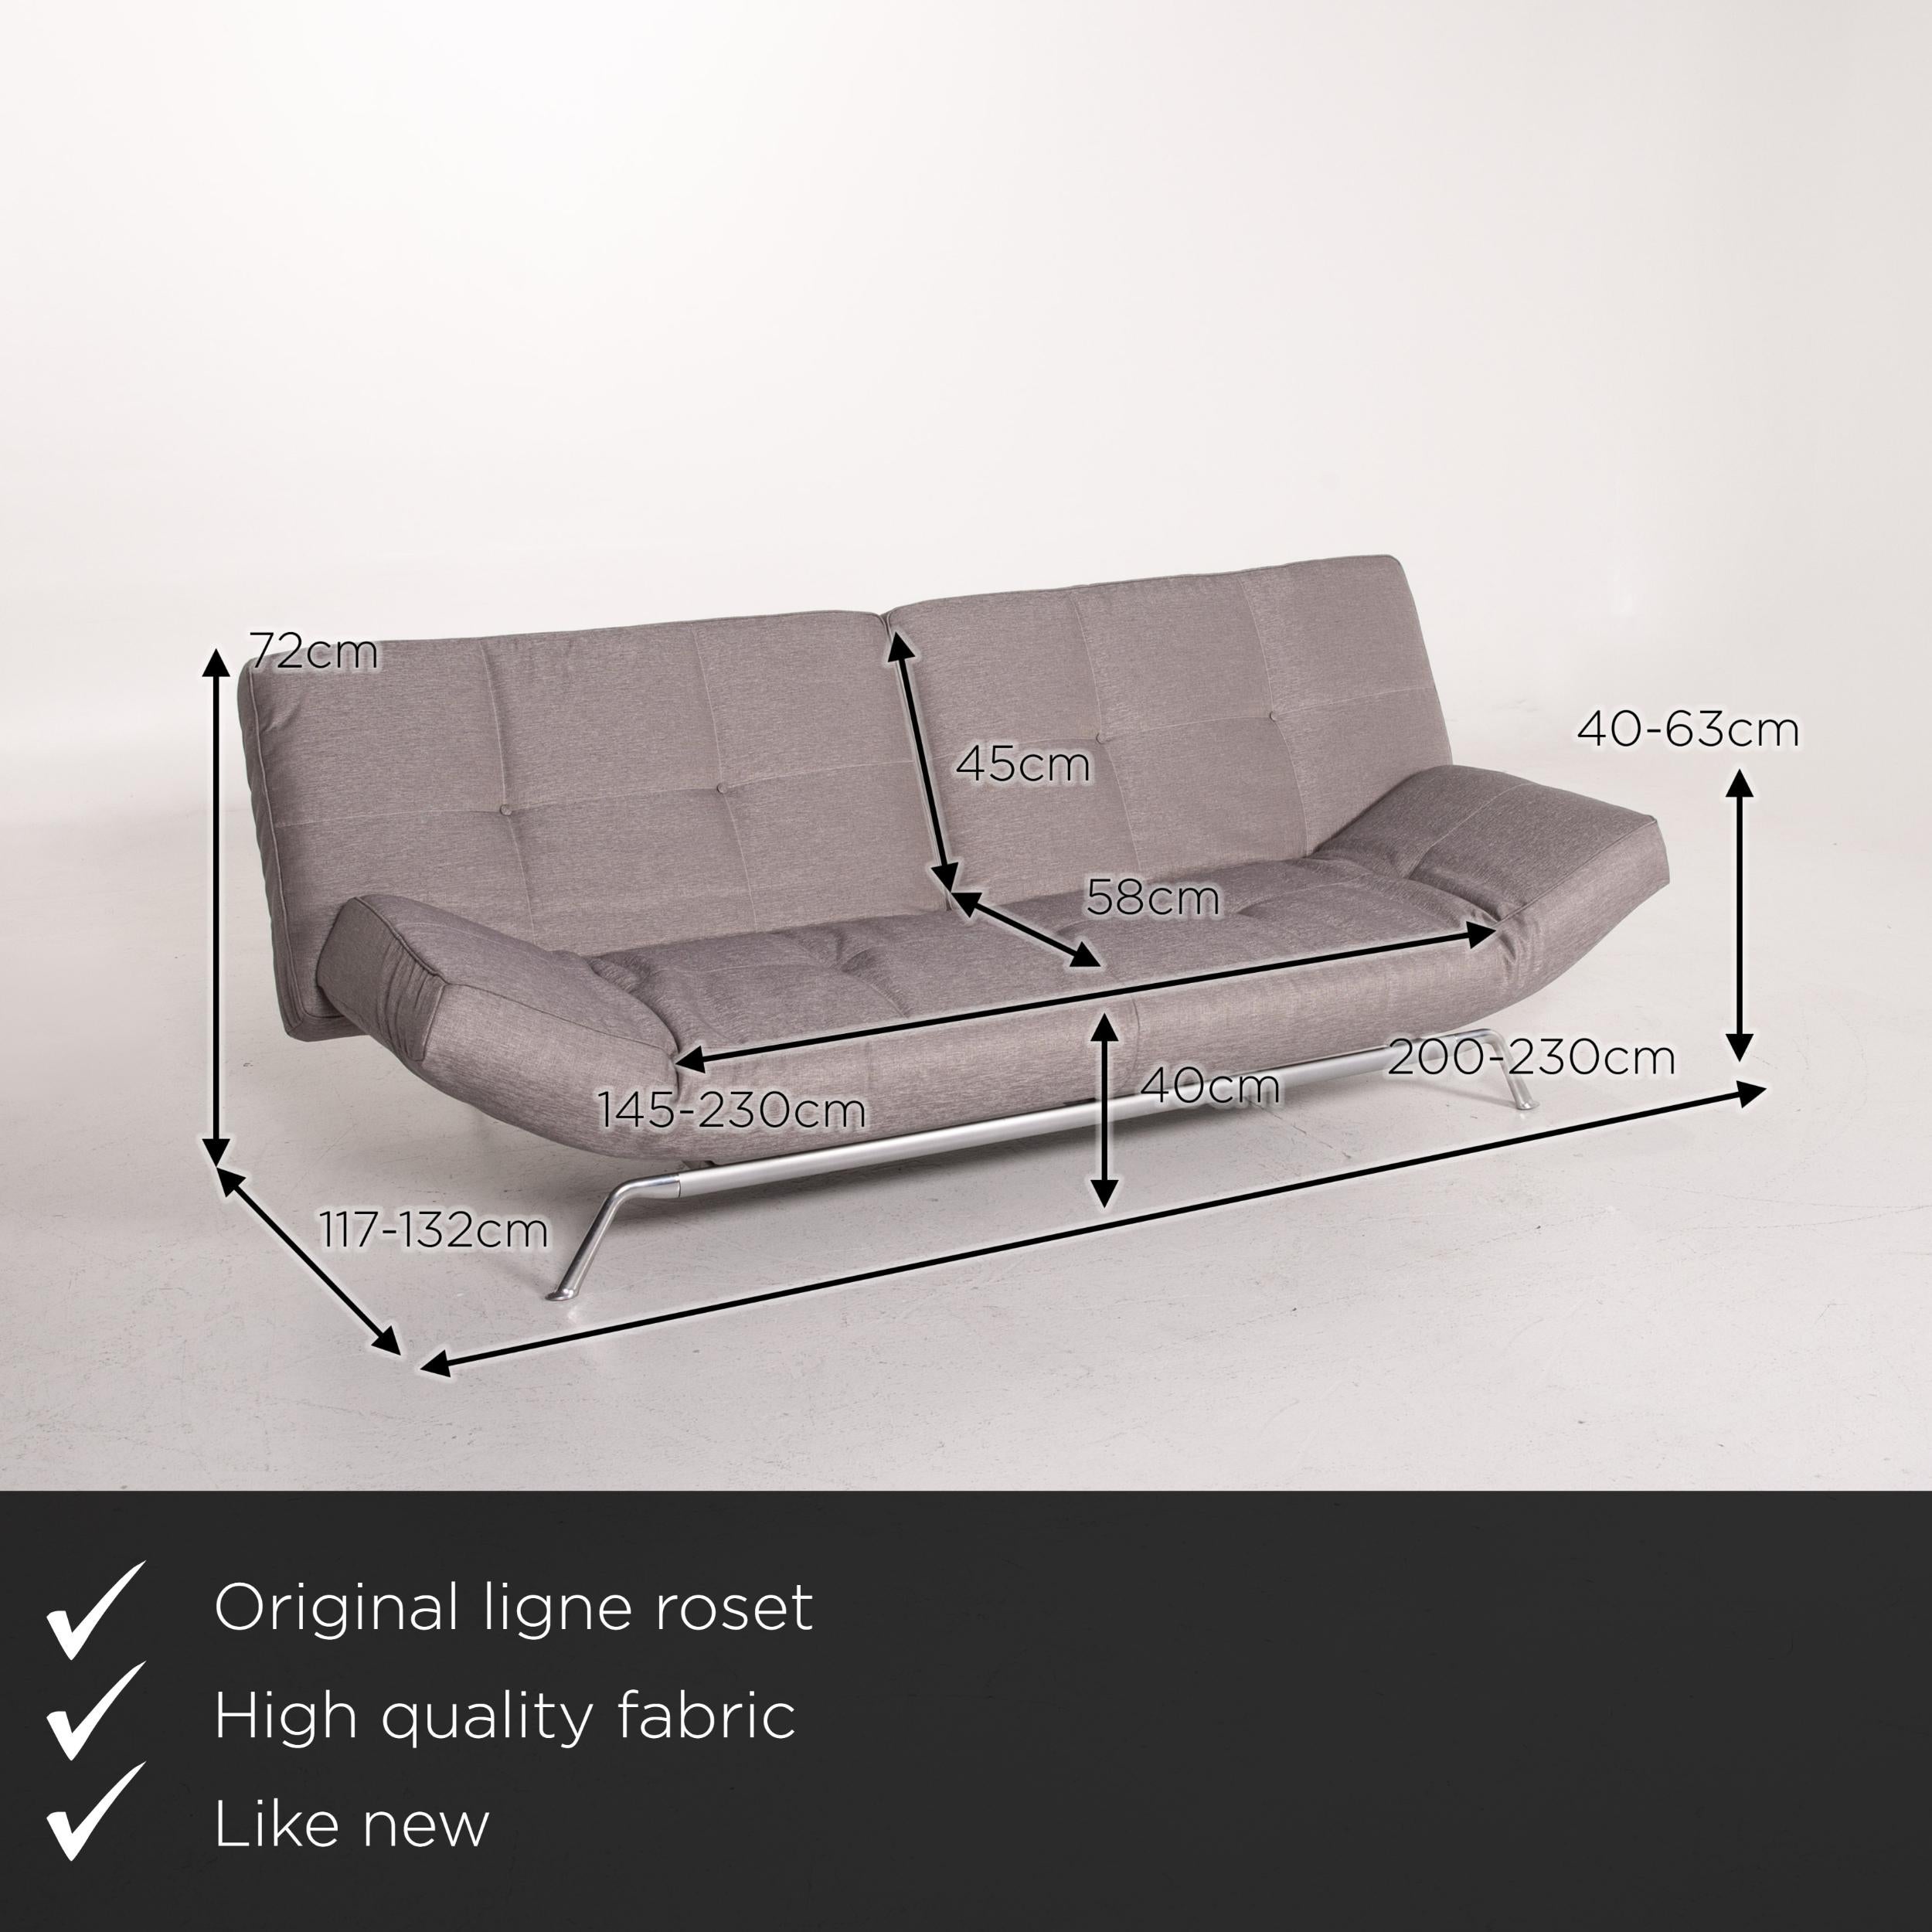 We present to you a ligne roset Smala fabric sofa gray silver three-seater function sleeping.

 

 Product measurements in centimeters:
 

Depth 117
Width 200
Height 72
Seat height 40
Rest height 63
Seat depth 58
Seat width 145
Back